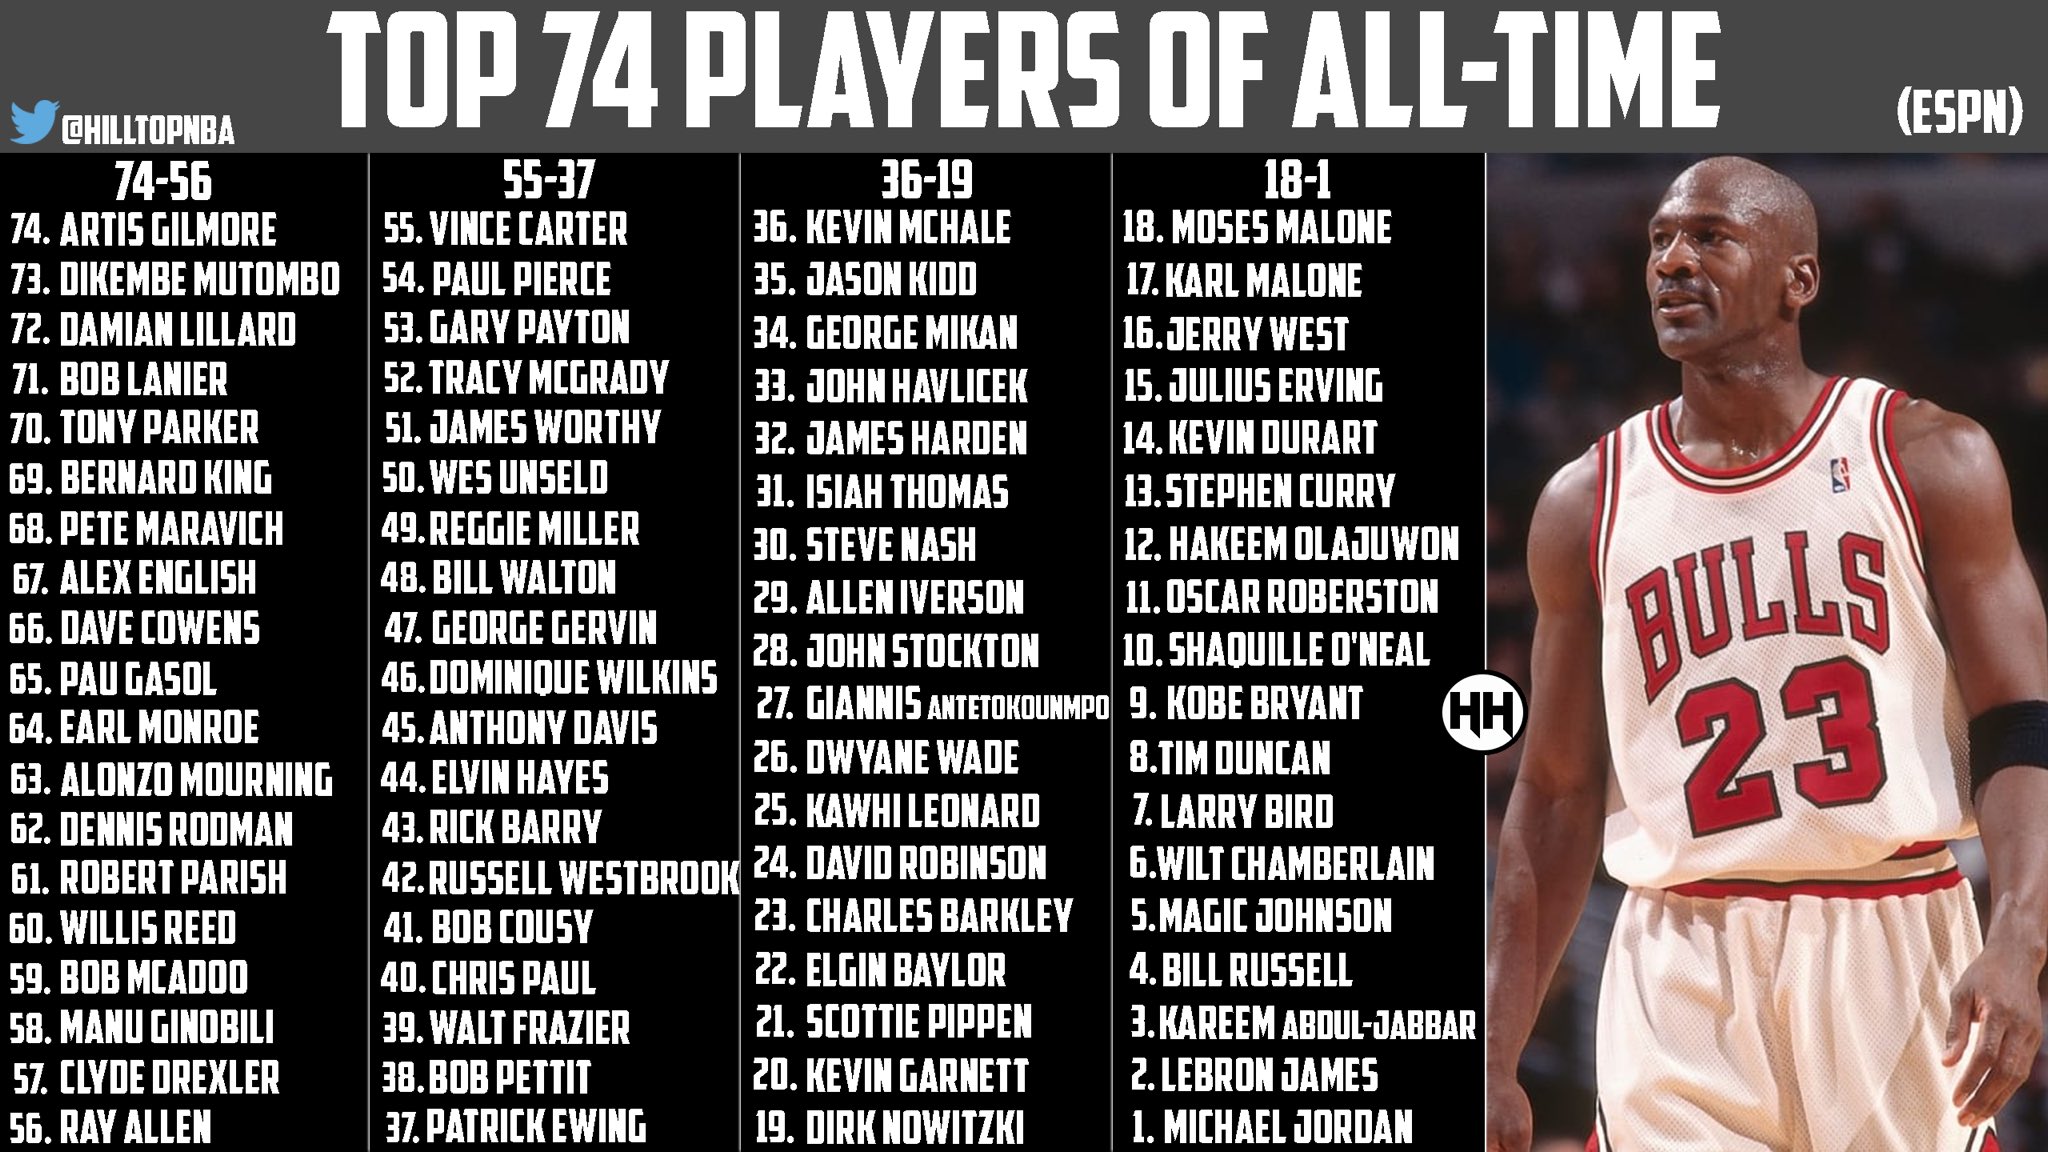 TOP NBA PLAYERS OF ALL TIME! VCU Ram Nation